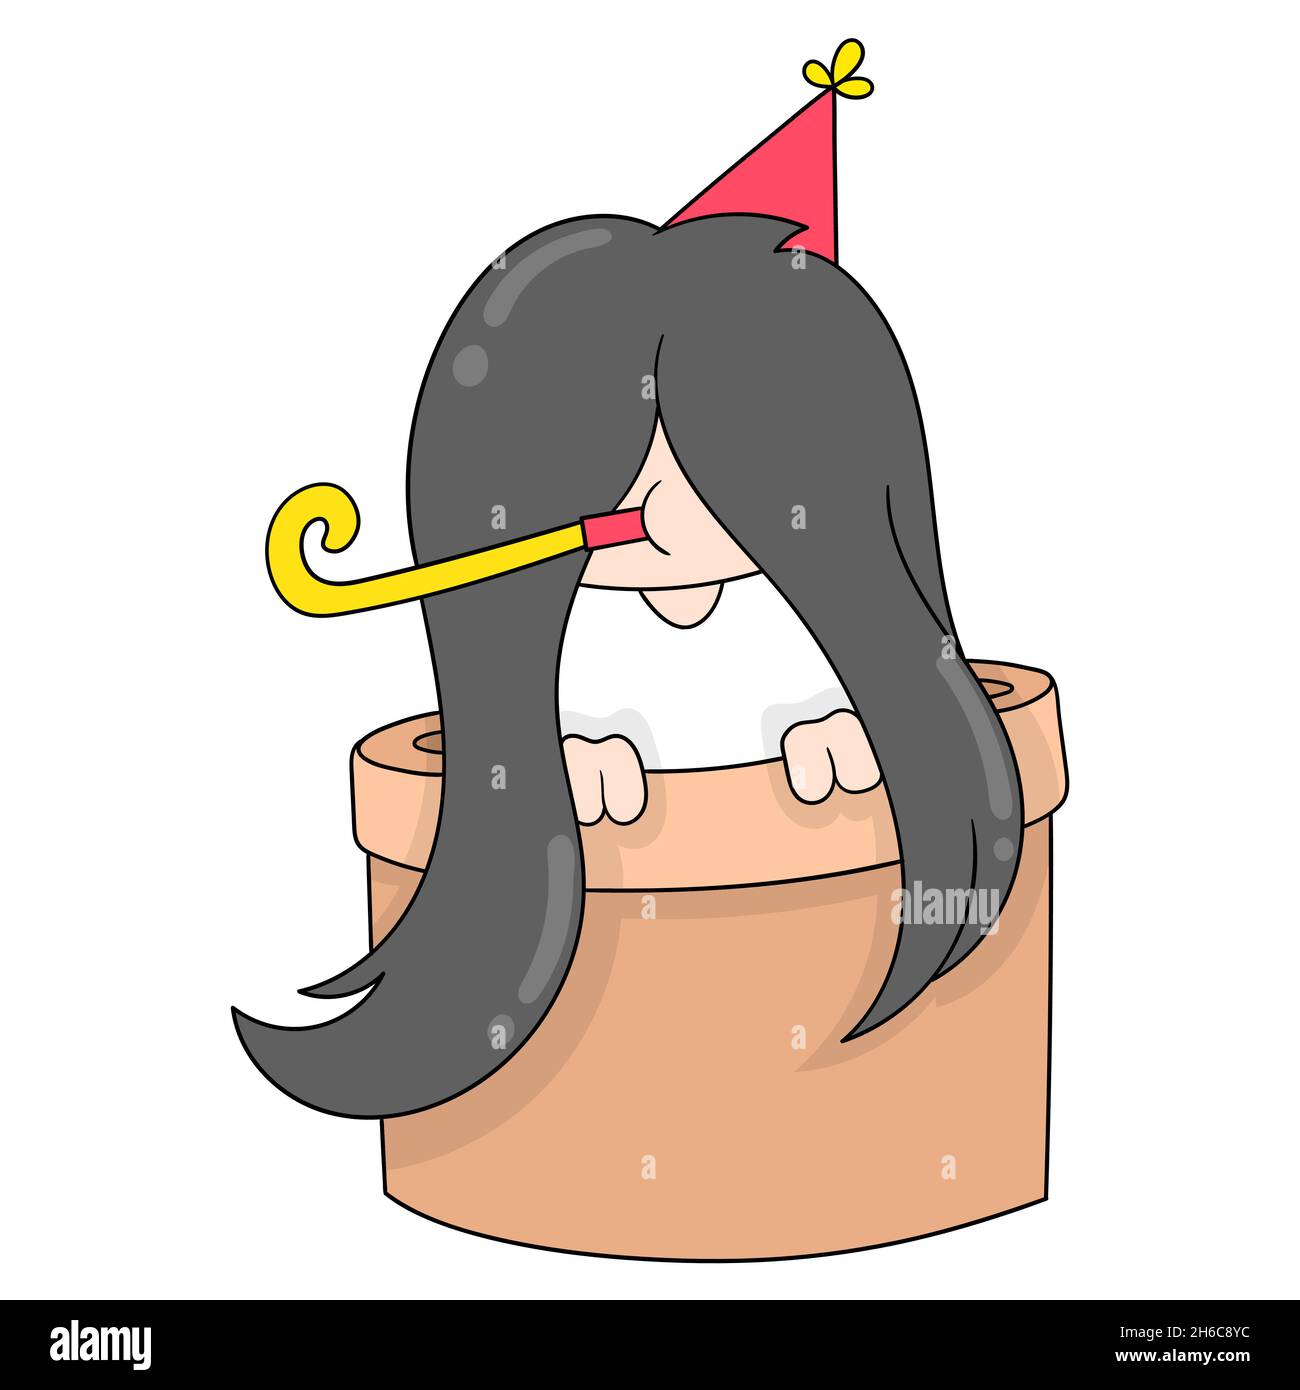 Japan endemic ghost Sadako comes out to celebrate the new year, vector illustration art. doodle icon image kawaii. Stock Vector